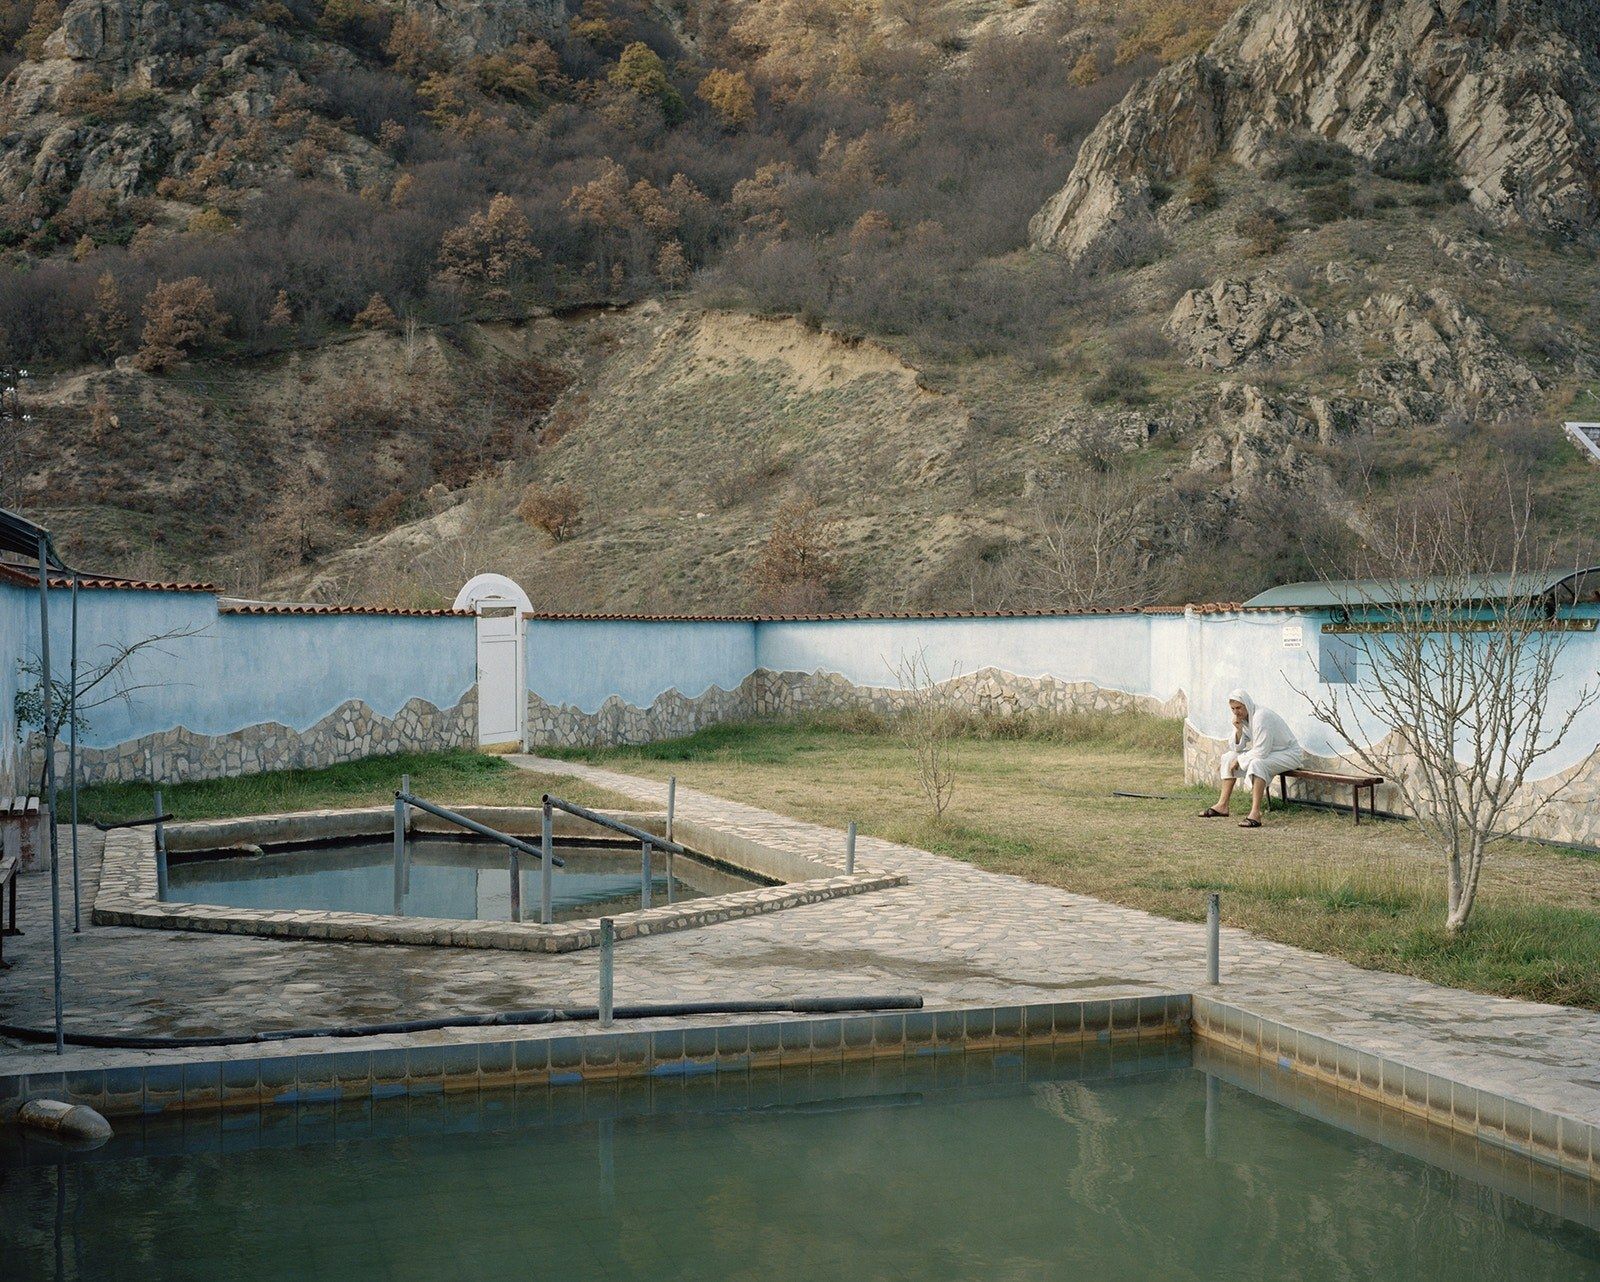 Photographing the Remnants of Europe's Borders